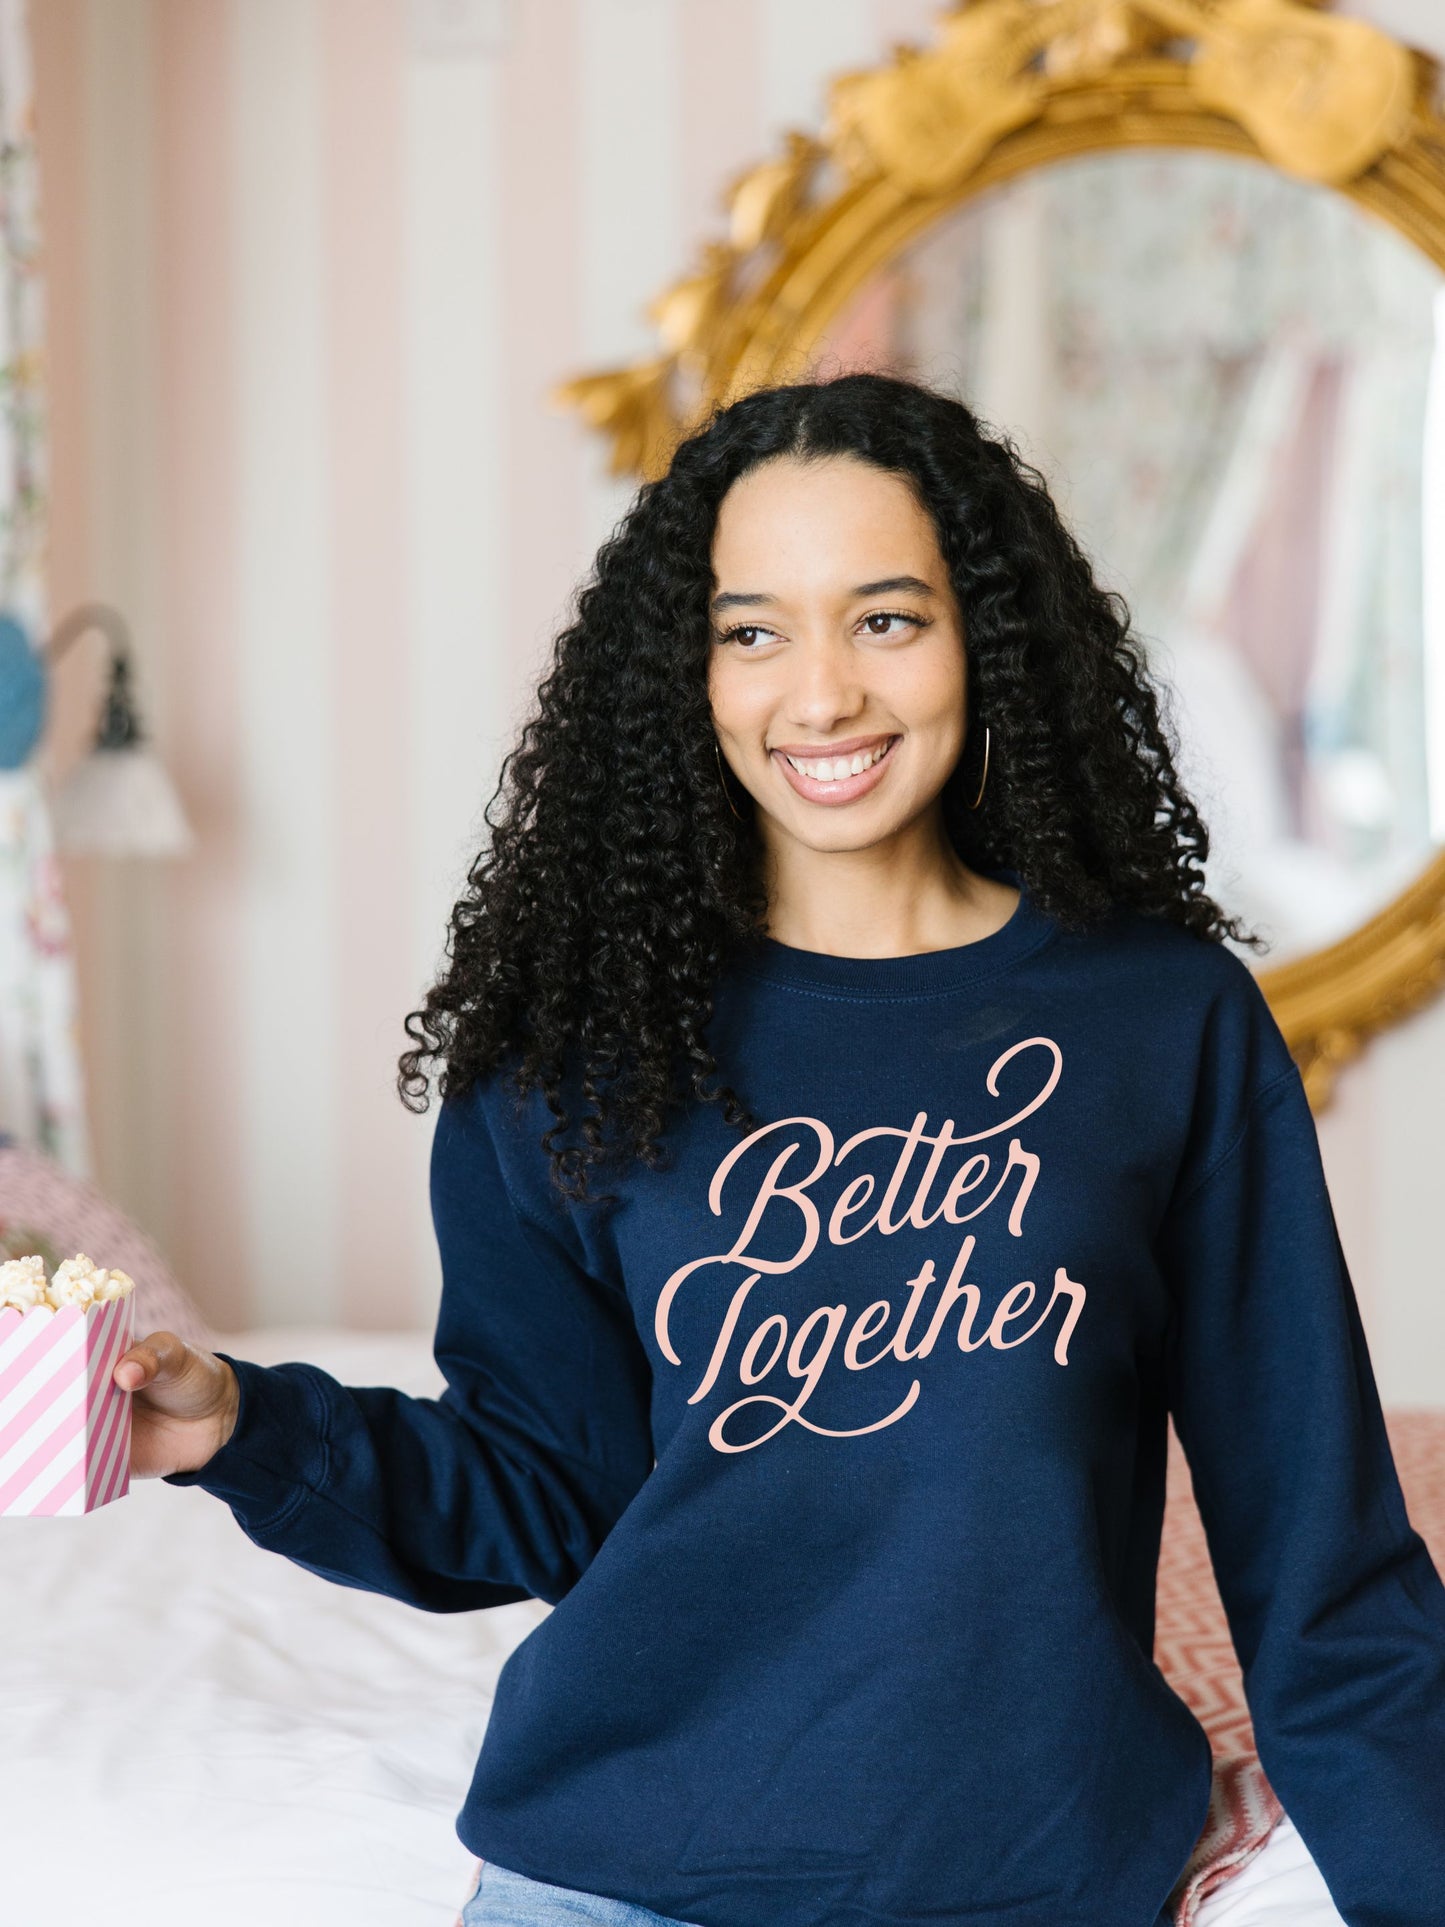 Better Together Sweatshirt for your next girls night